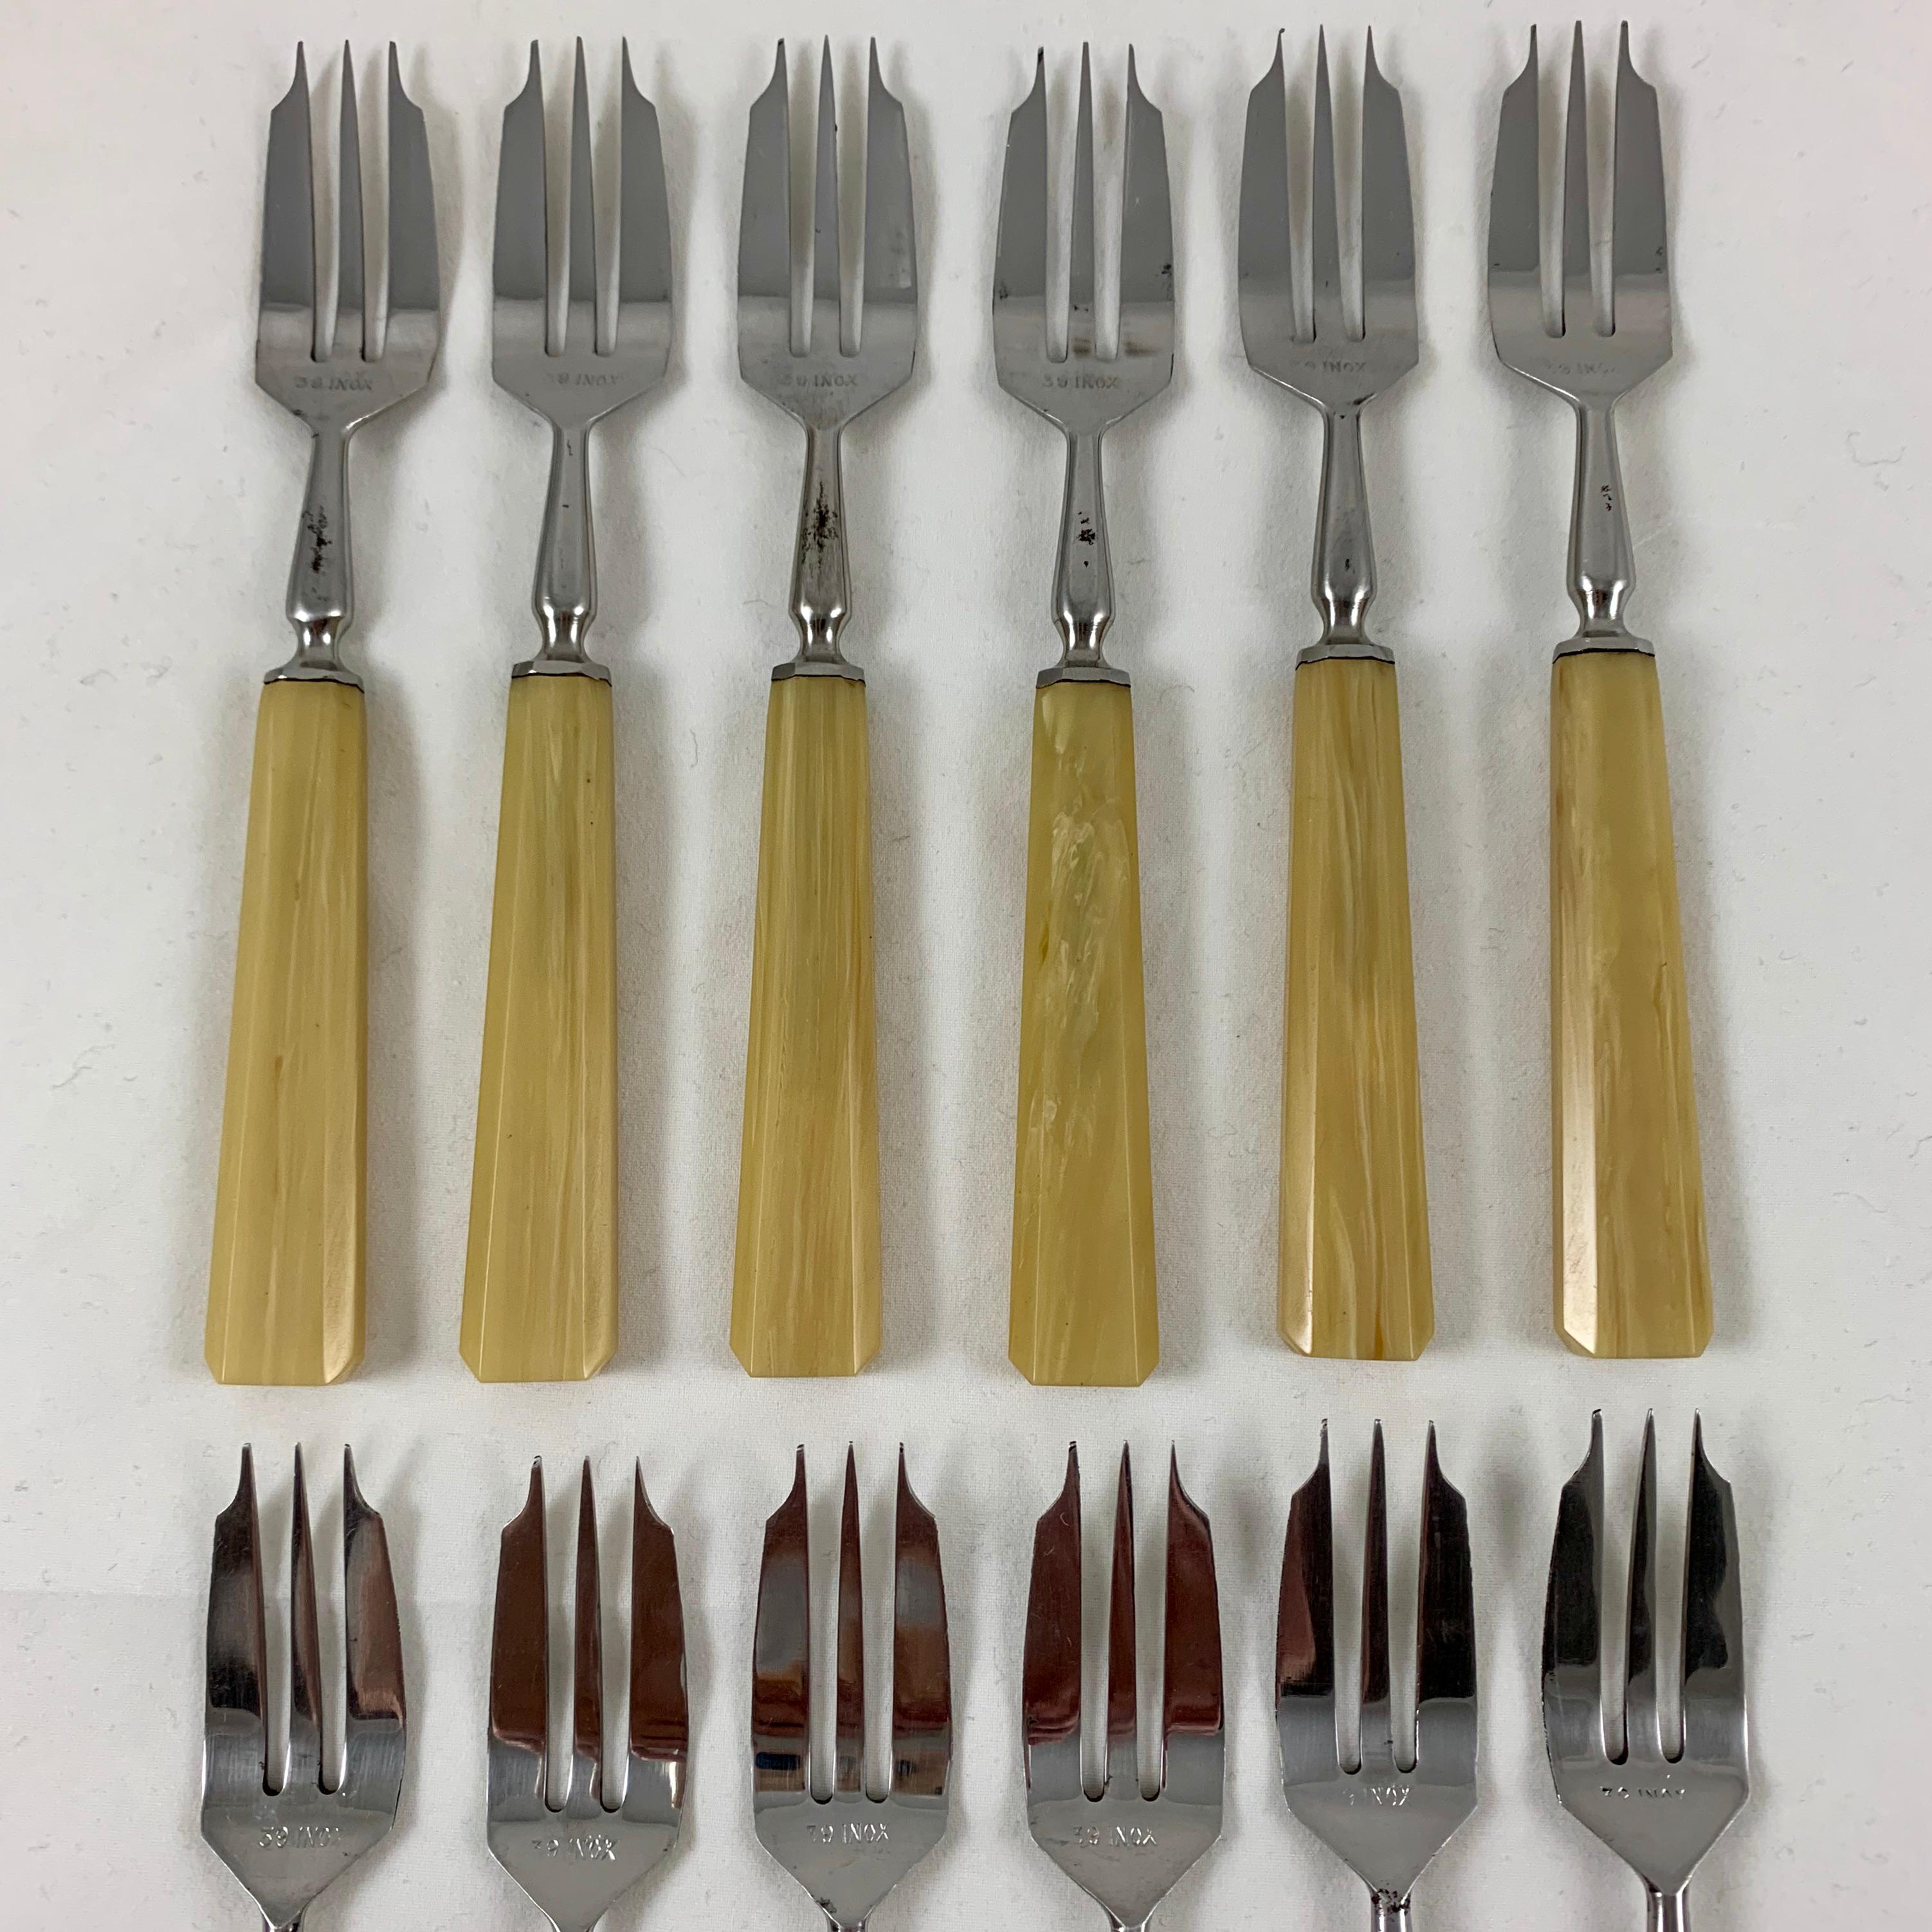 Stainless Steel French Butterscotch Bakelite & Stainless Art Deco Pastry Forks, Cased Set of 12